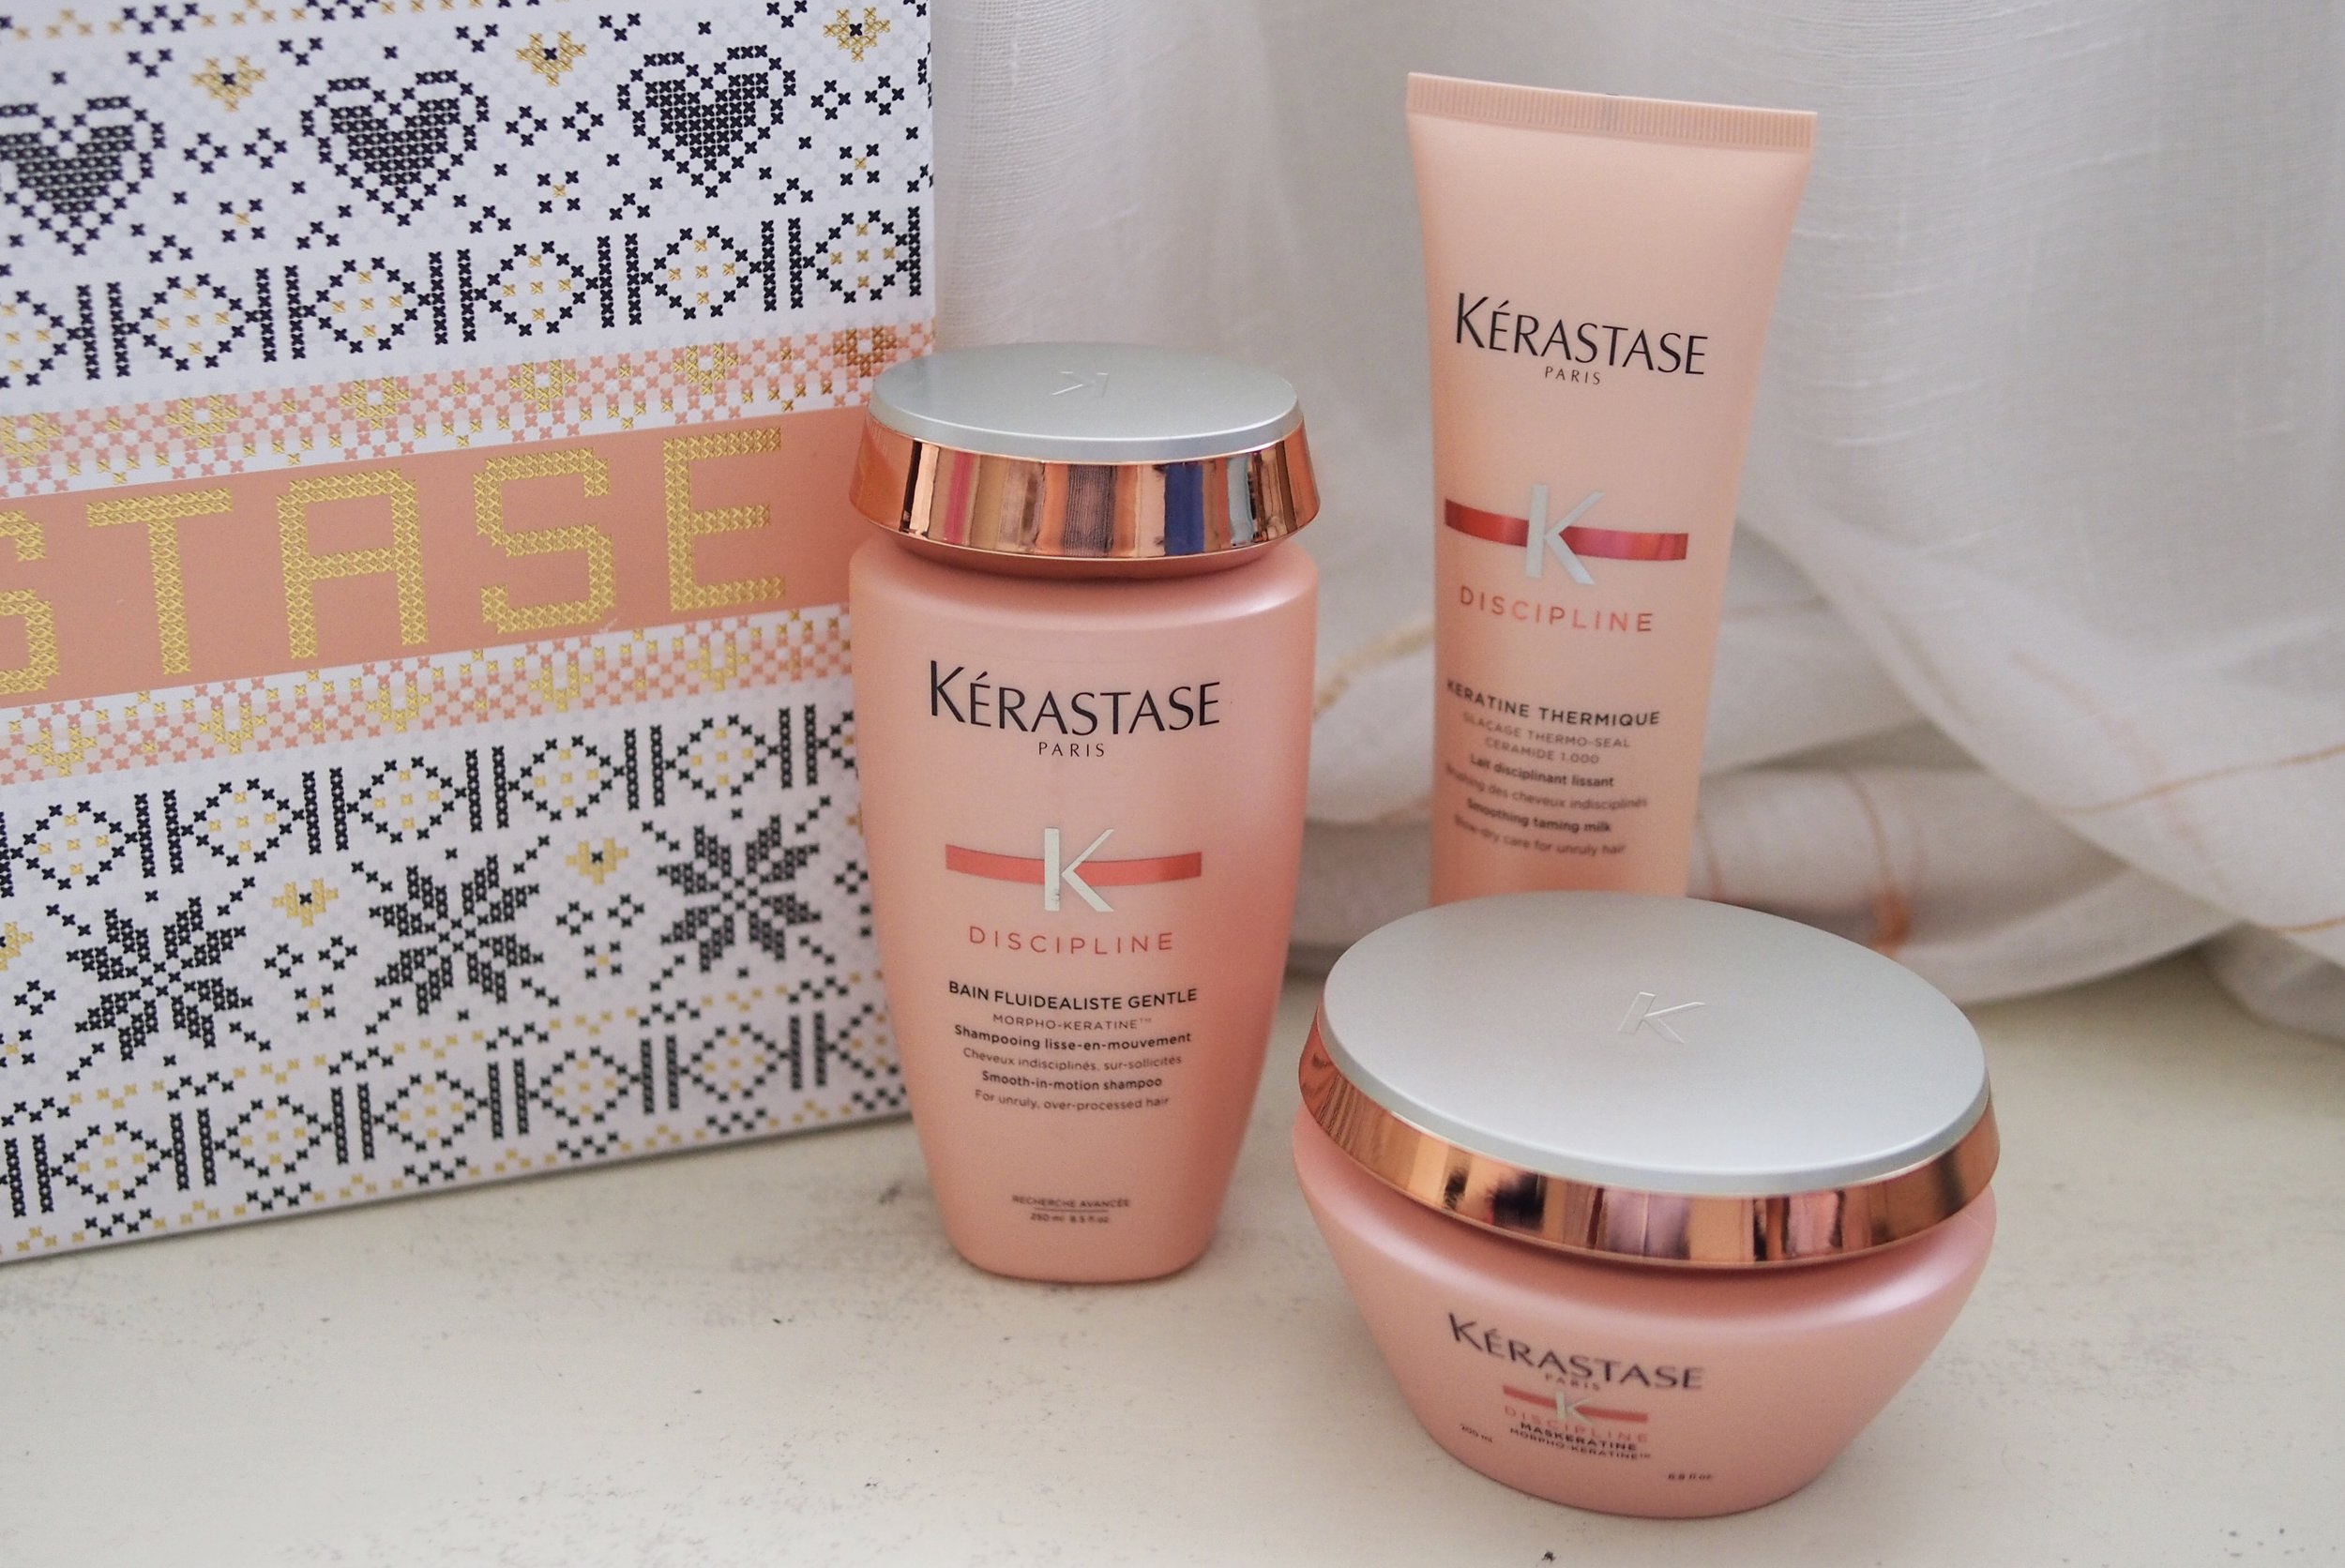 Trying out the Kerastase Discipline Fluidealiste Anti-Frizz Masque Hair  Ritual on my grey, frizzy hair: Did it work? — Project Vanity